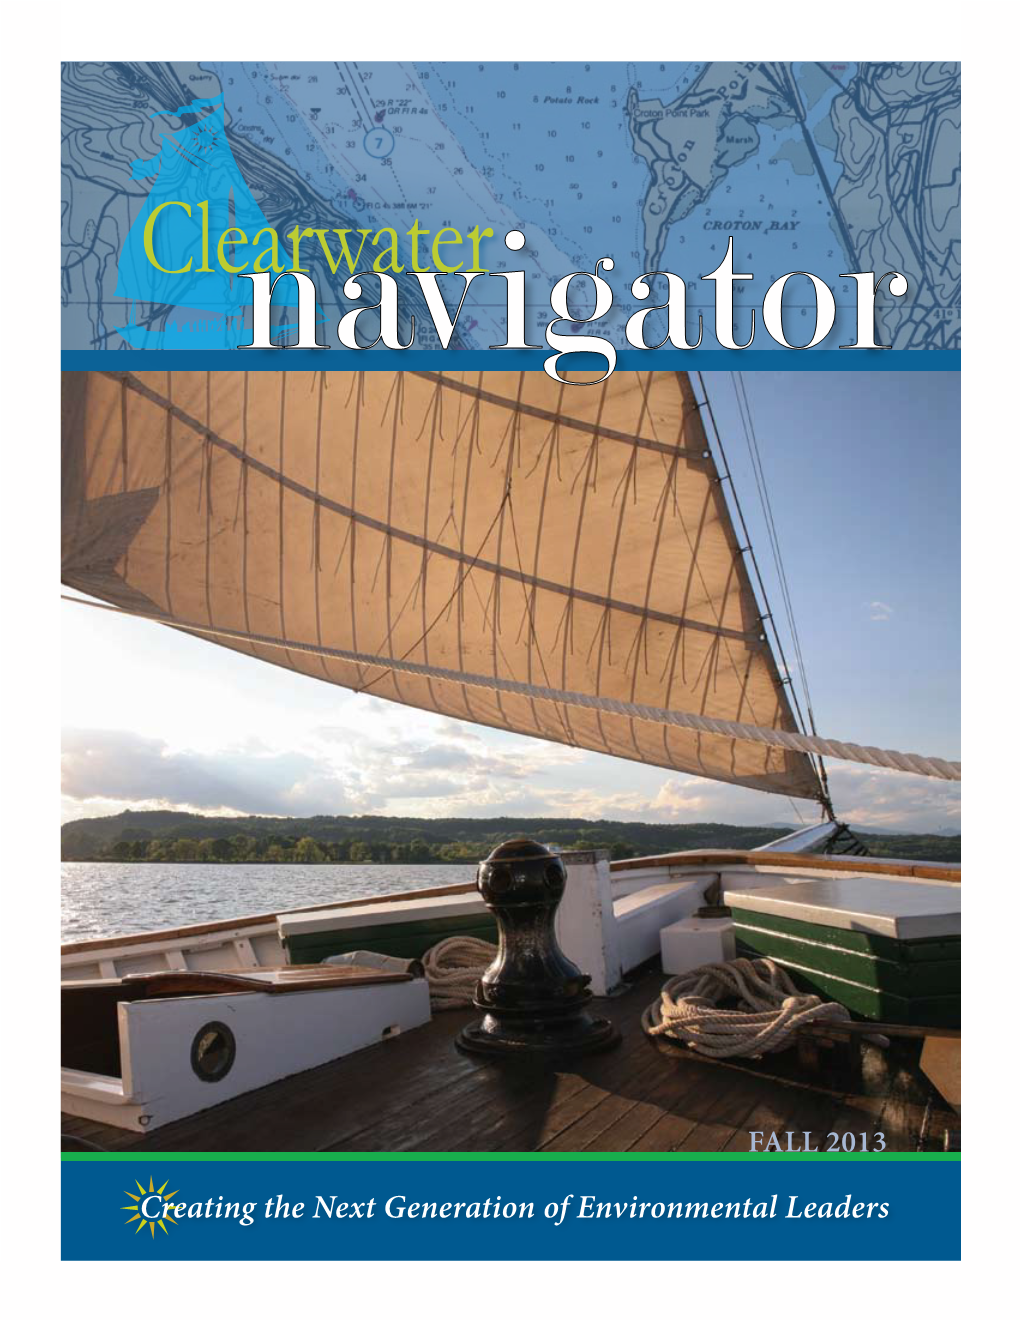 CLEARWATER NAVIGATOR Is Published by Hudson River Sloop Clearwater, Inc